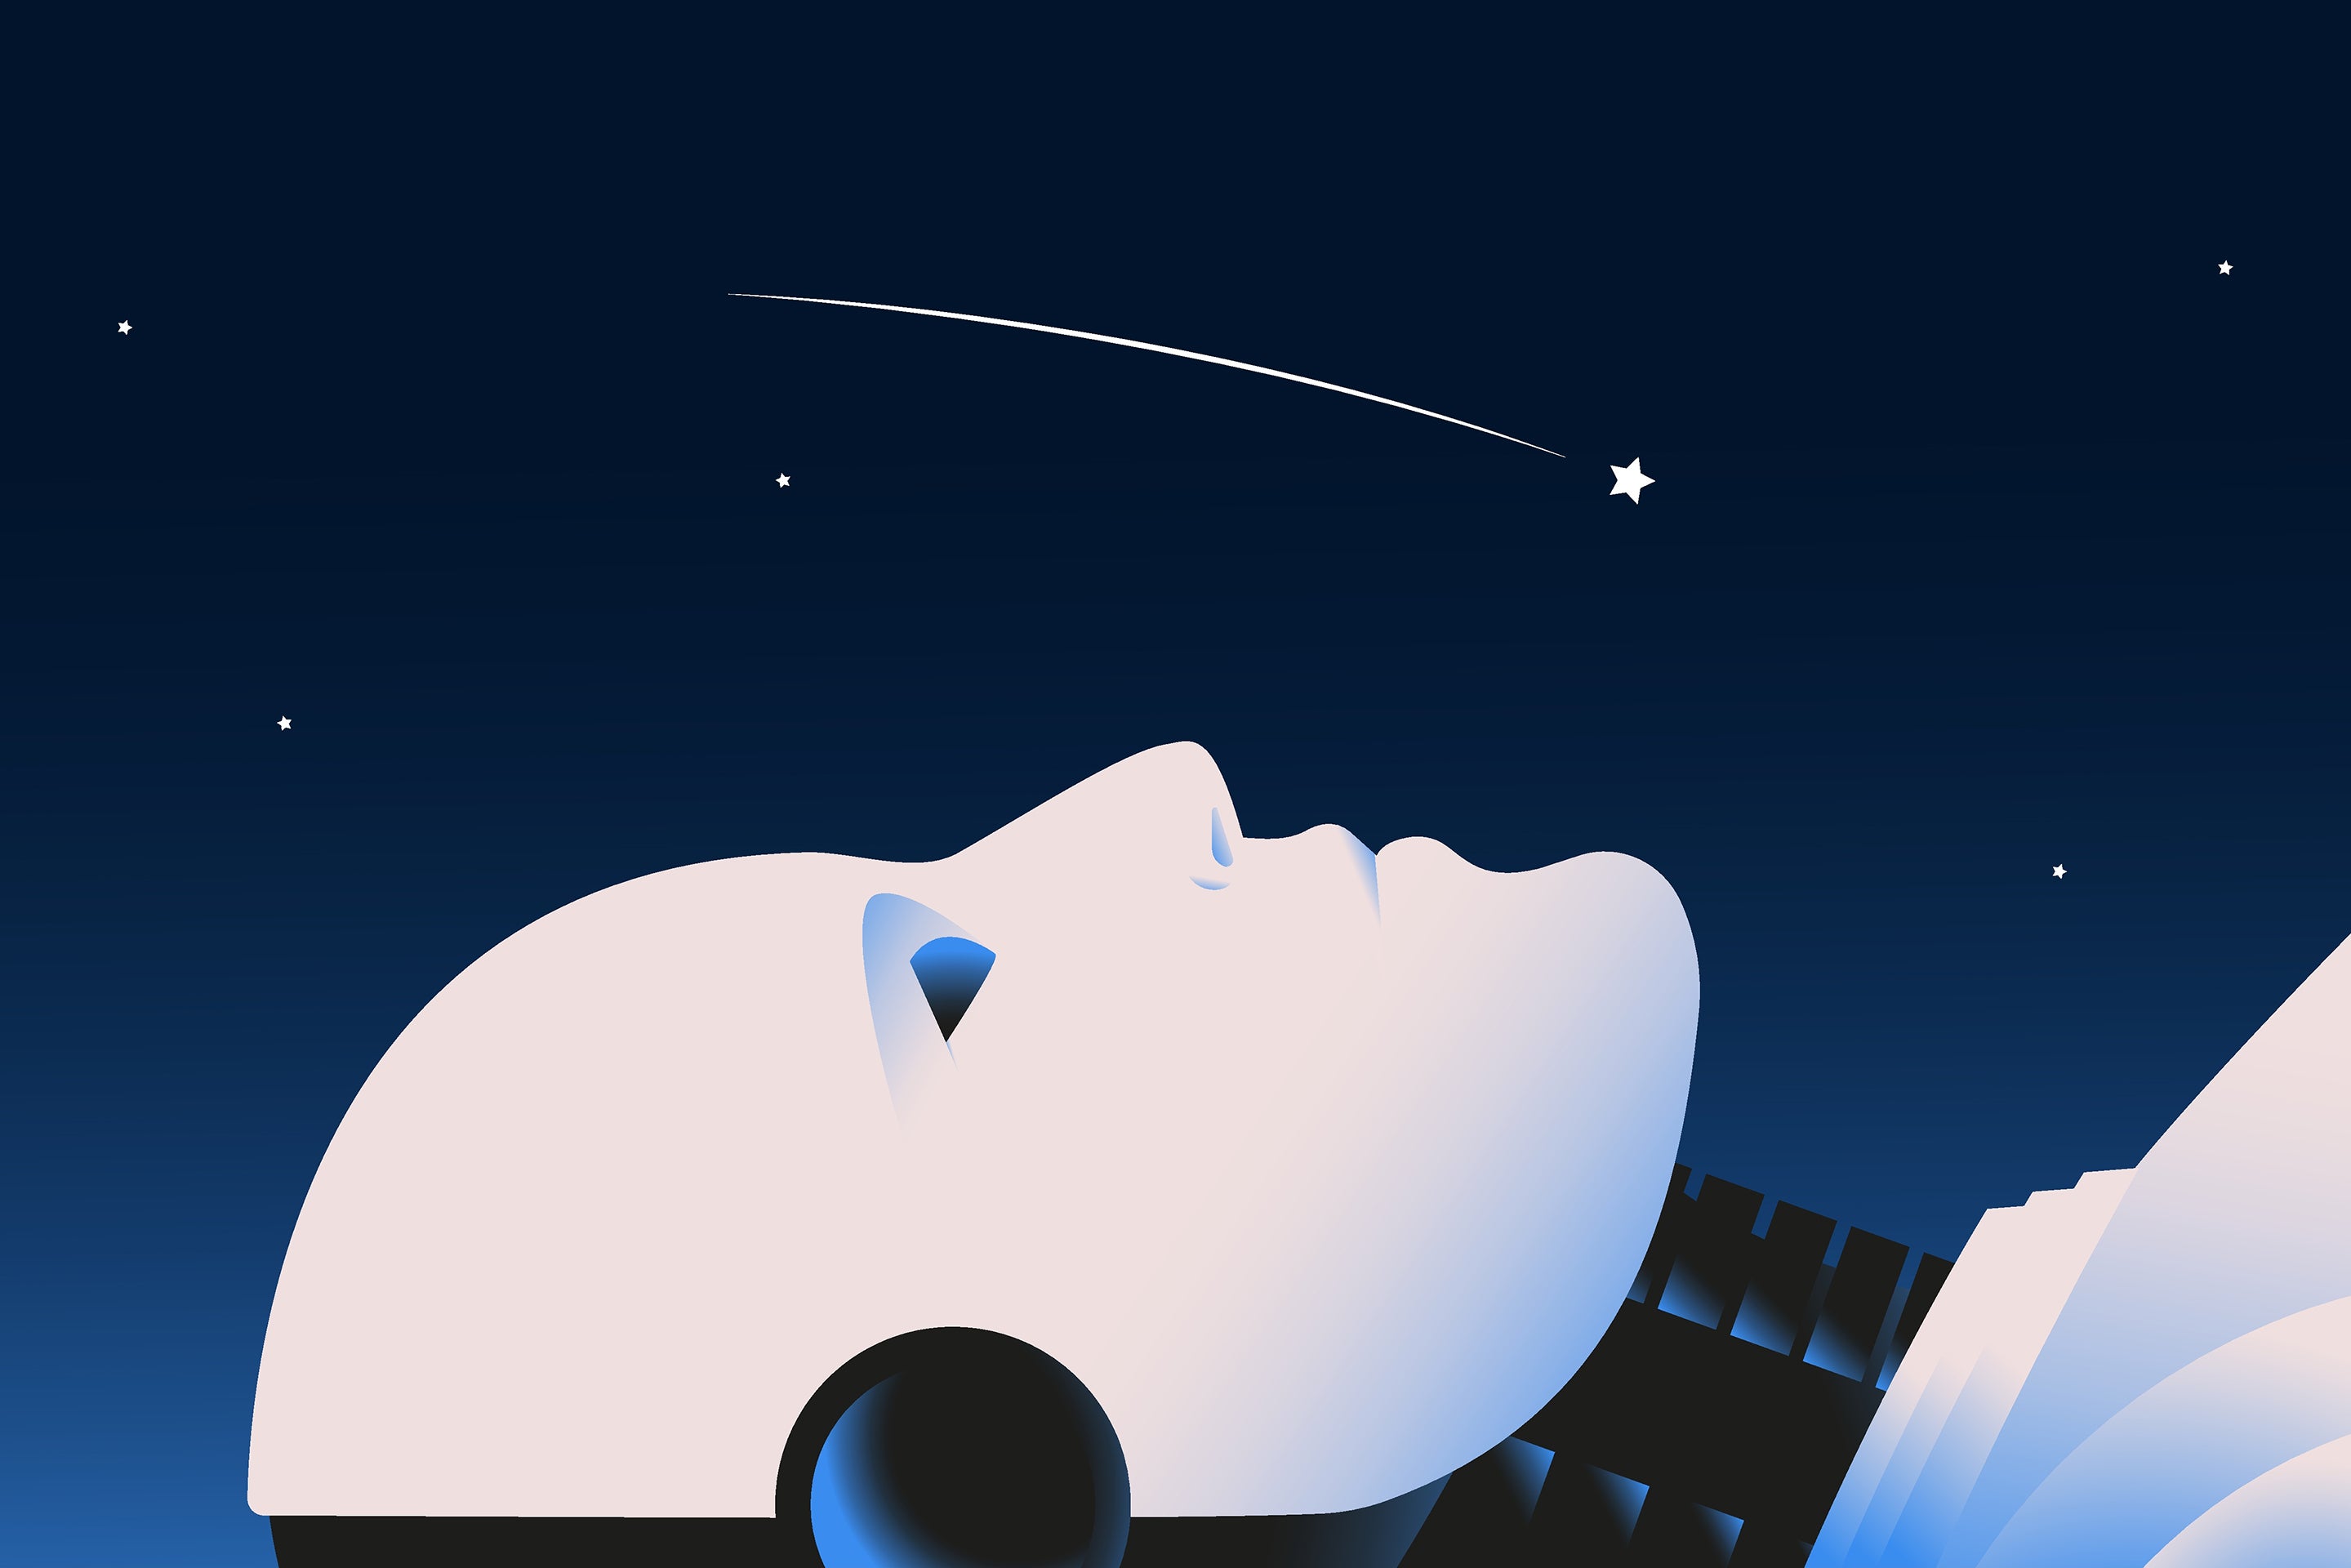 Vector illustration, chatbot or AI concept showing profile of a humanoid robot looking up at the night sky with a shooting star while laying down